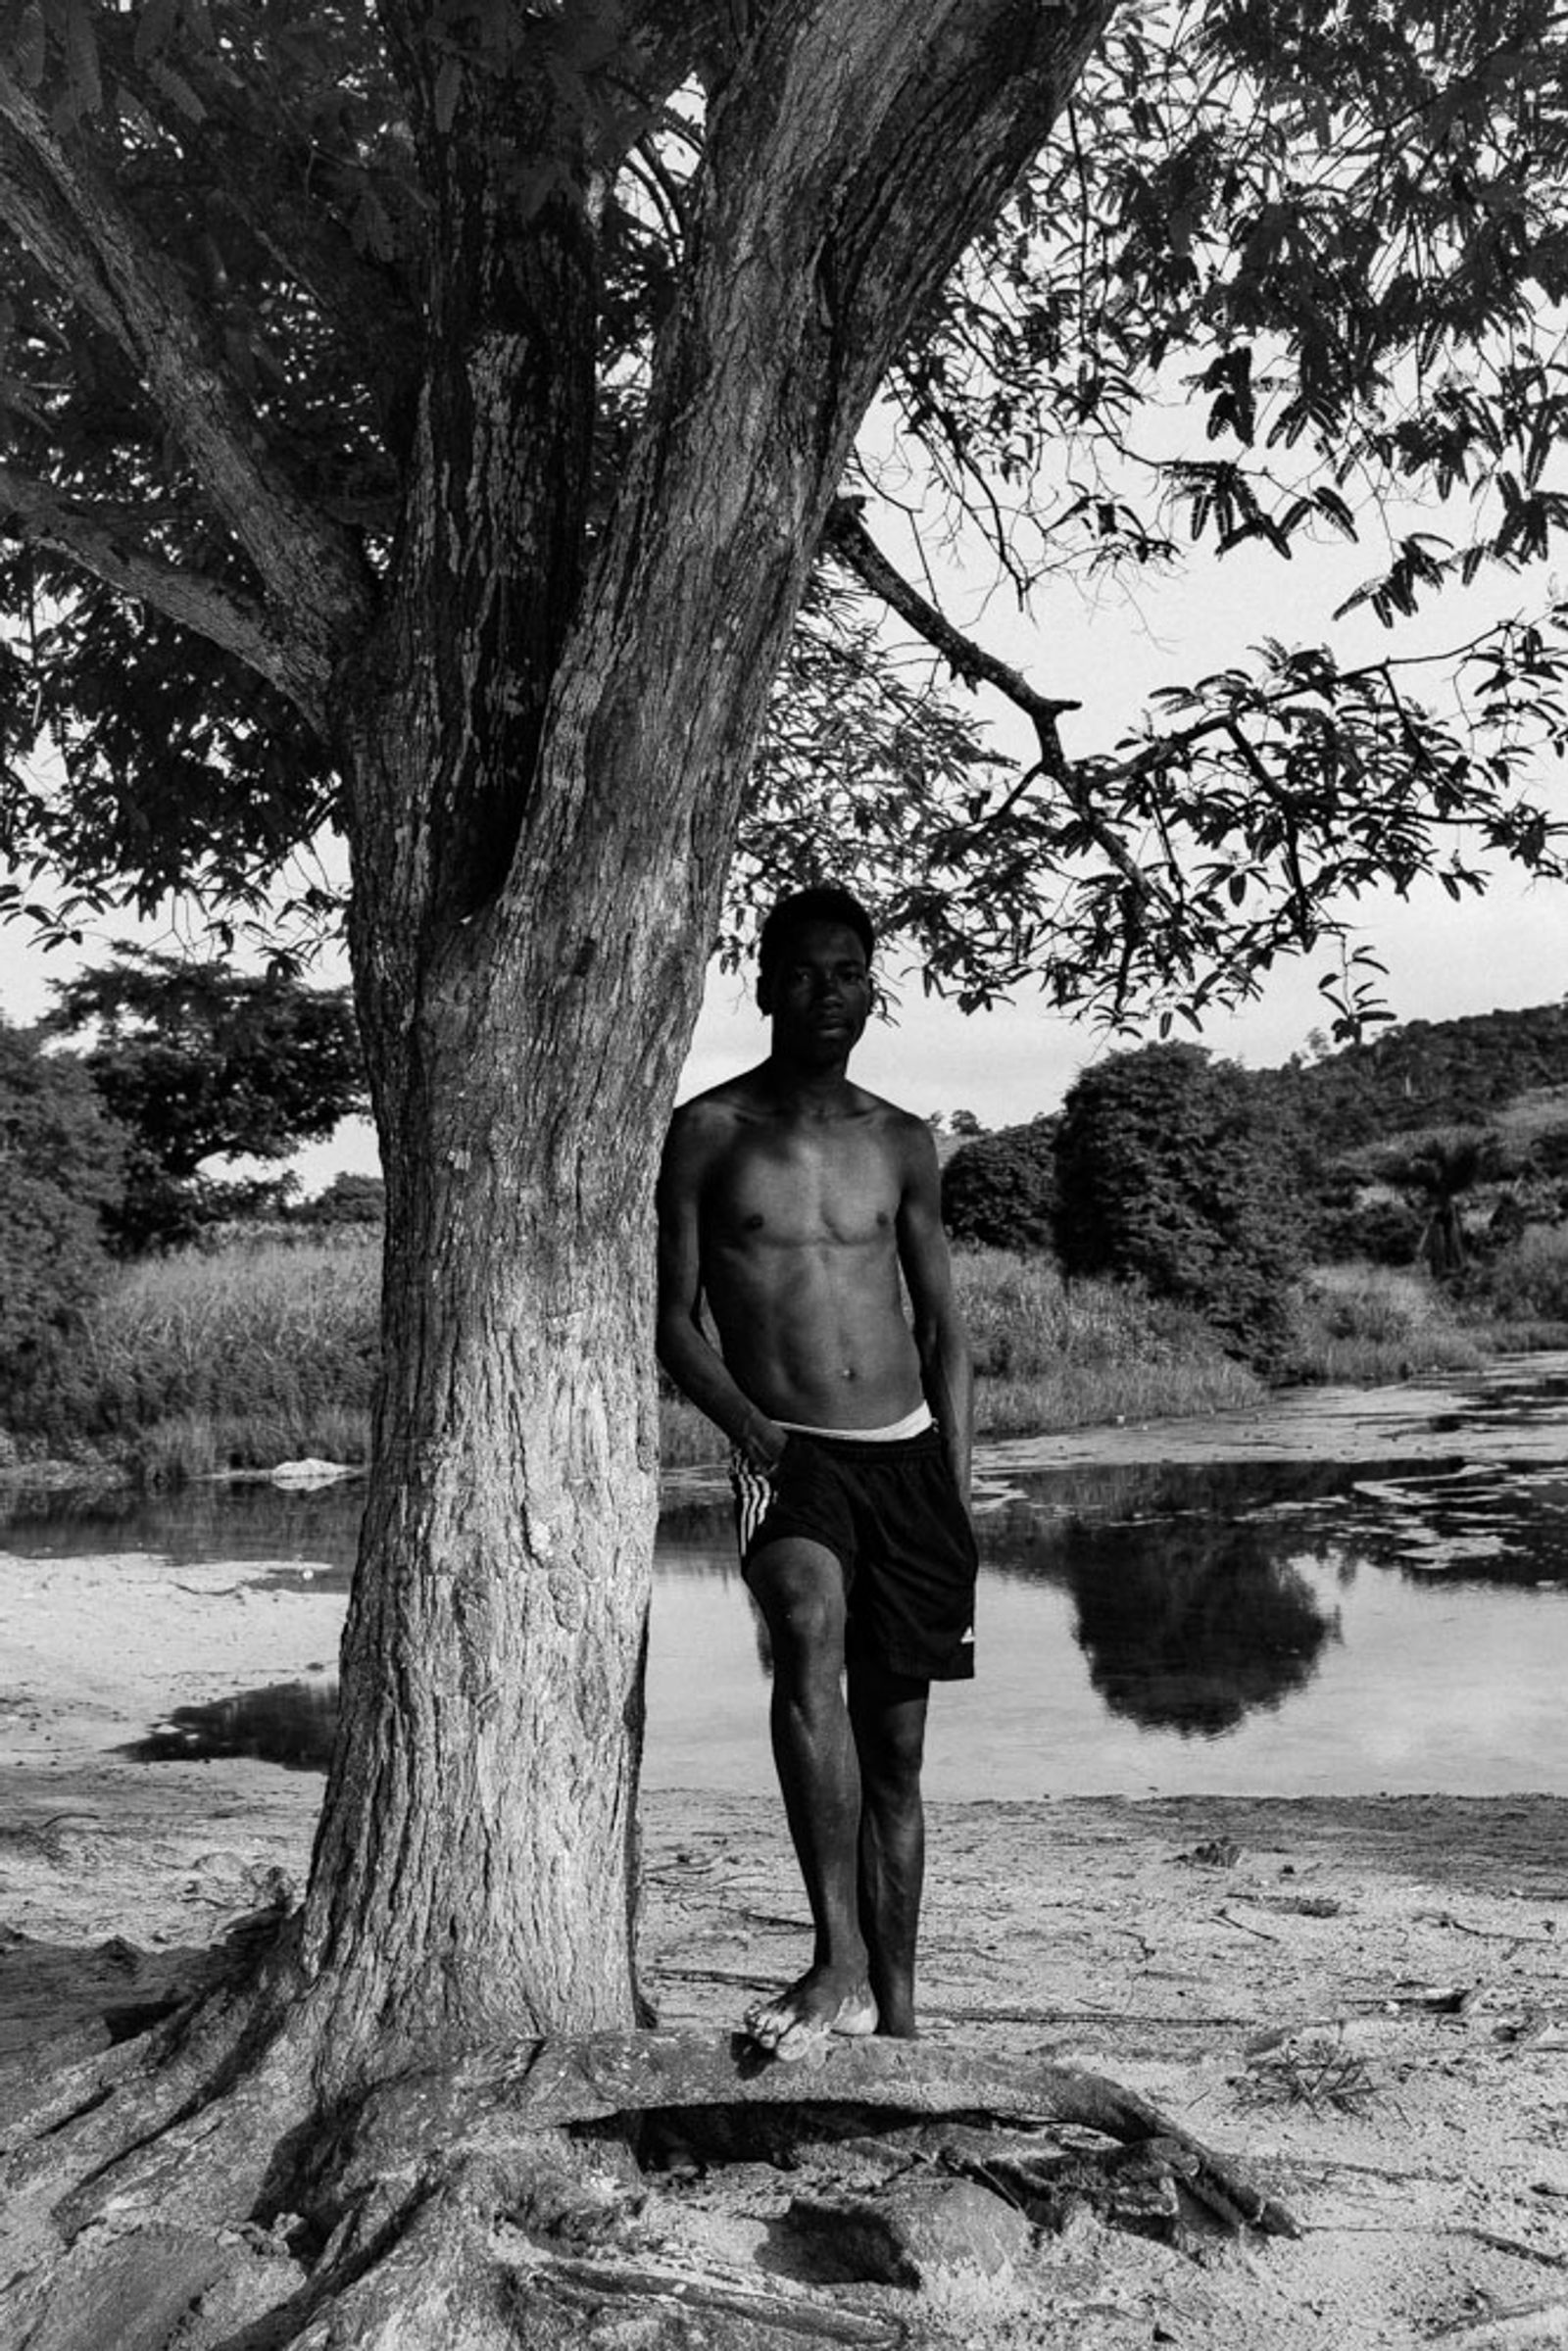 © Theo Gould - Praia dos Tamarindos – Taking a break from the strong, sub-tropical sun under a tamarind tree.